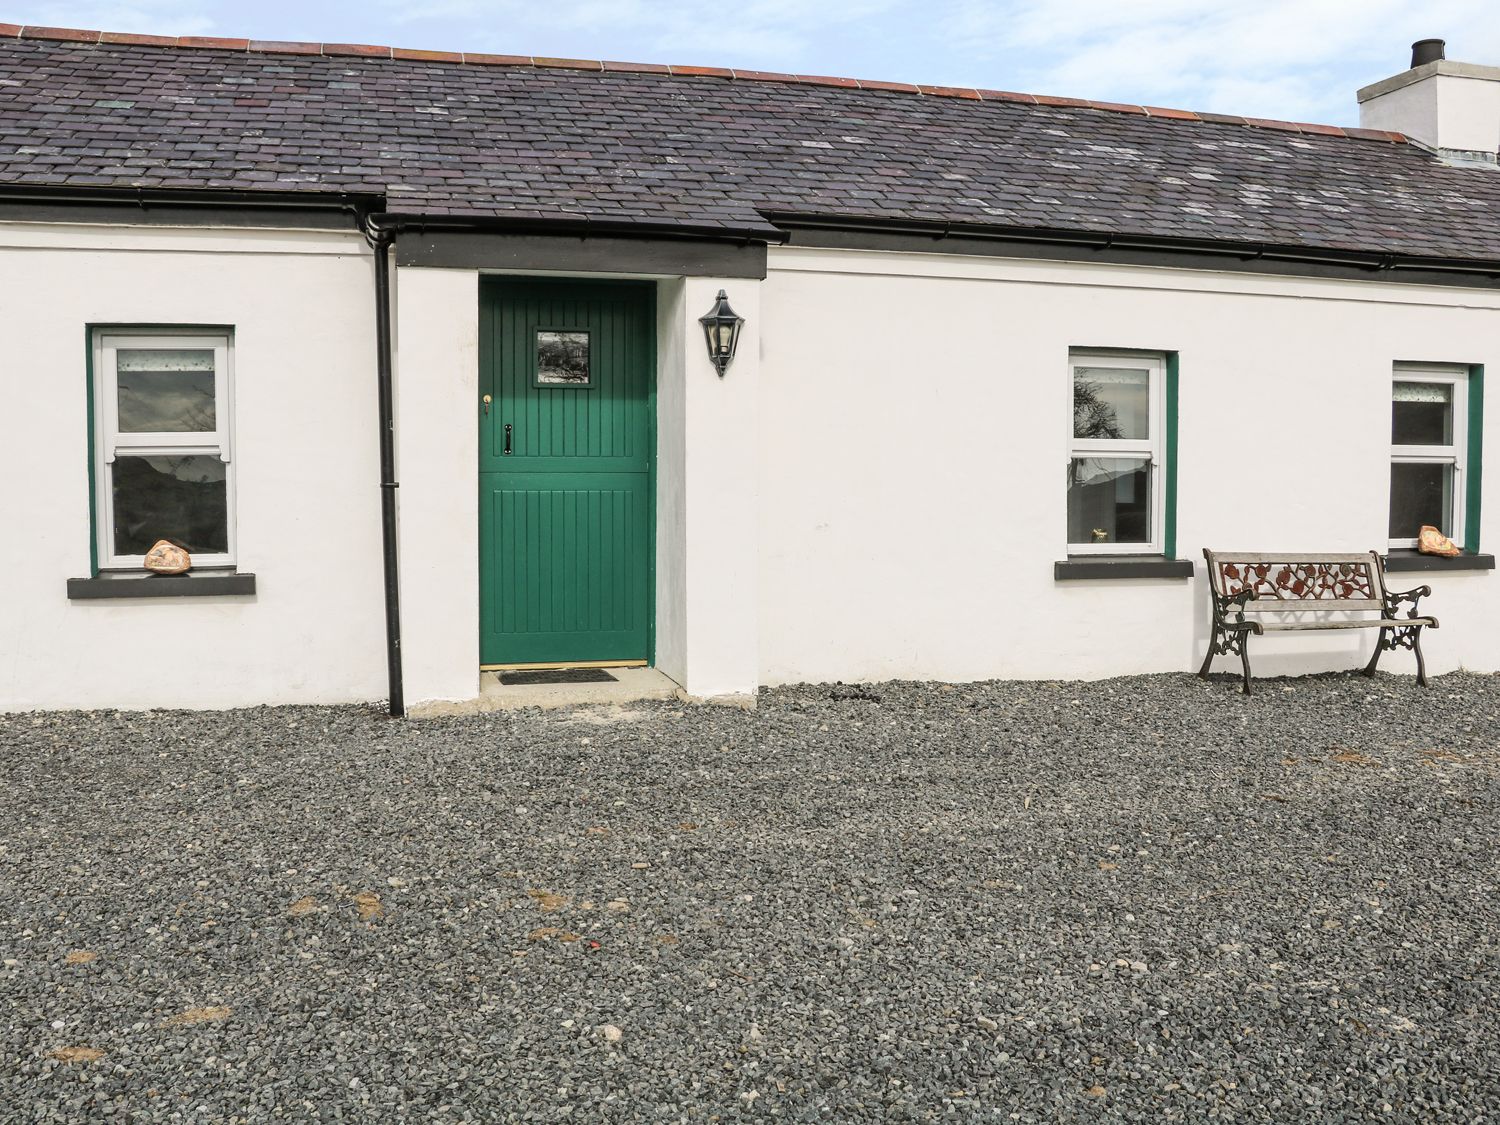 Pat White's Cottage, County Down